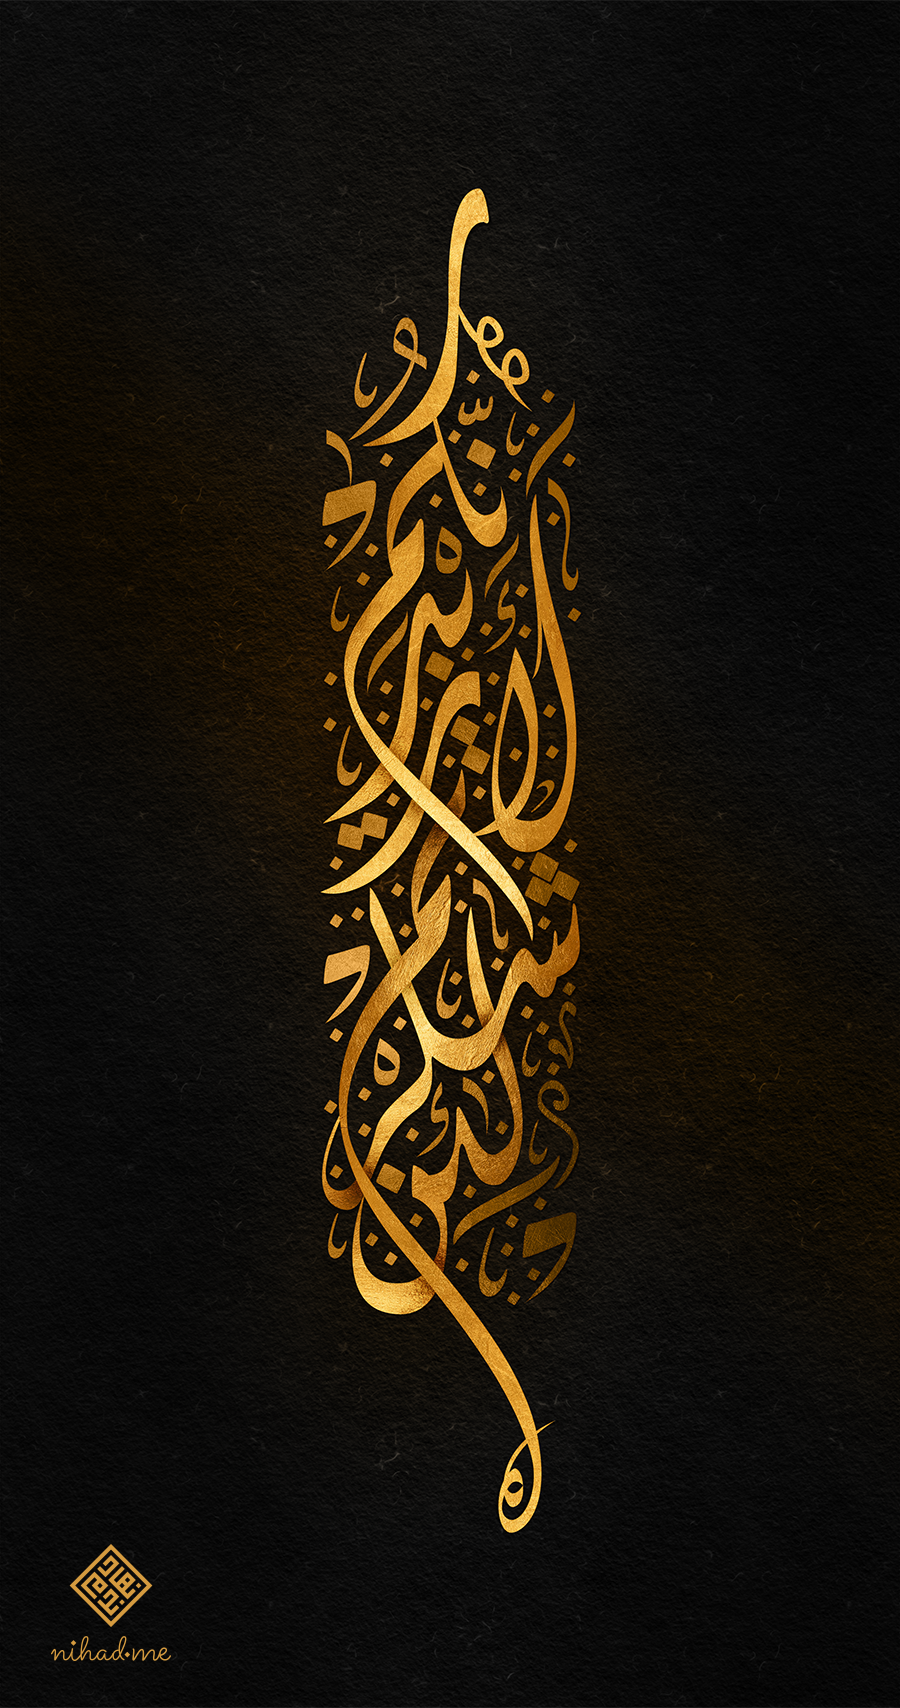 If you are grateful I shall give you more Islamic Art. Islamic art calligraphy, Islamic caligraphy art, Caligraphy art